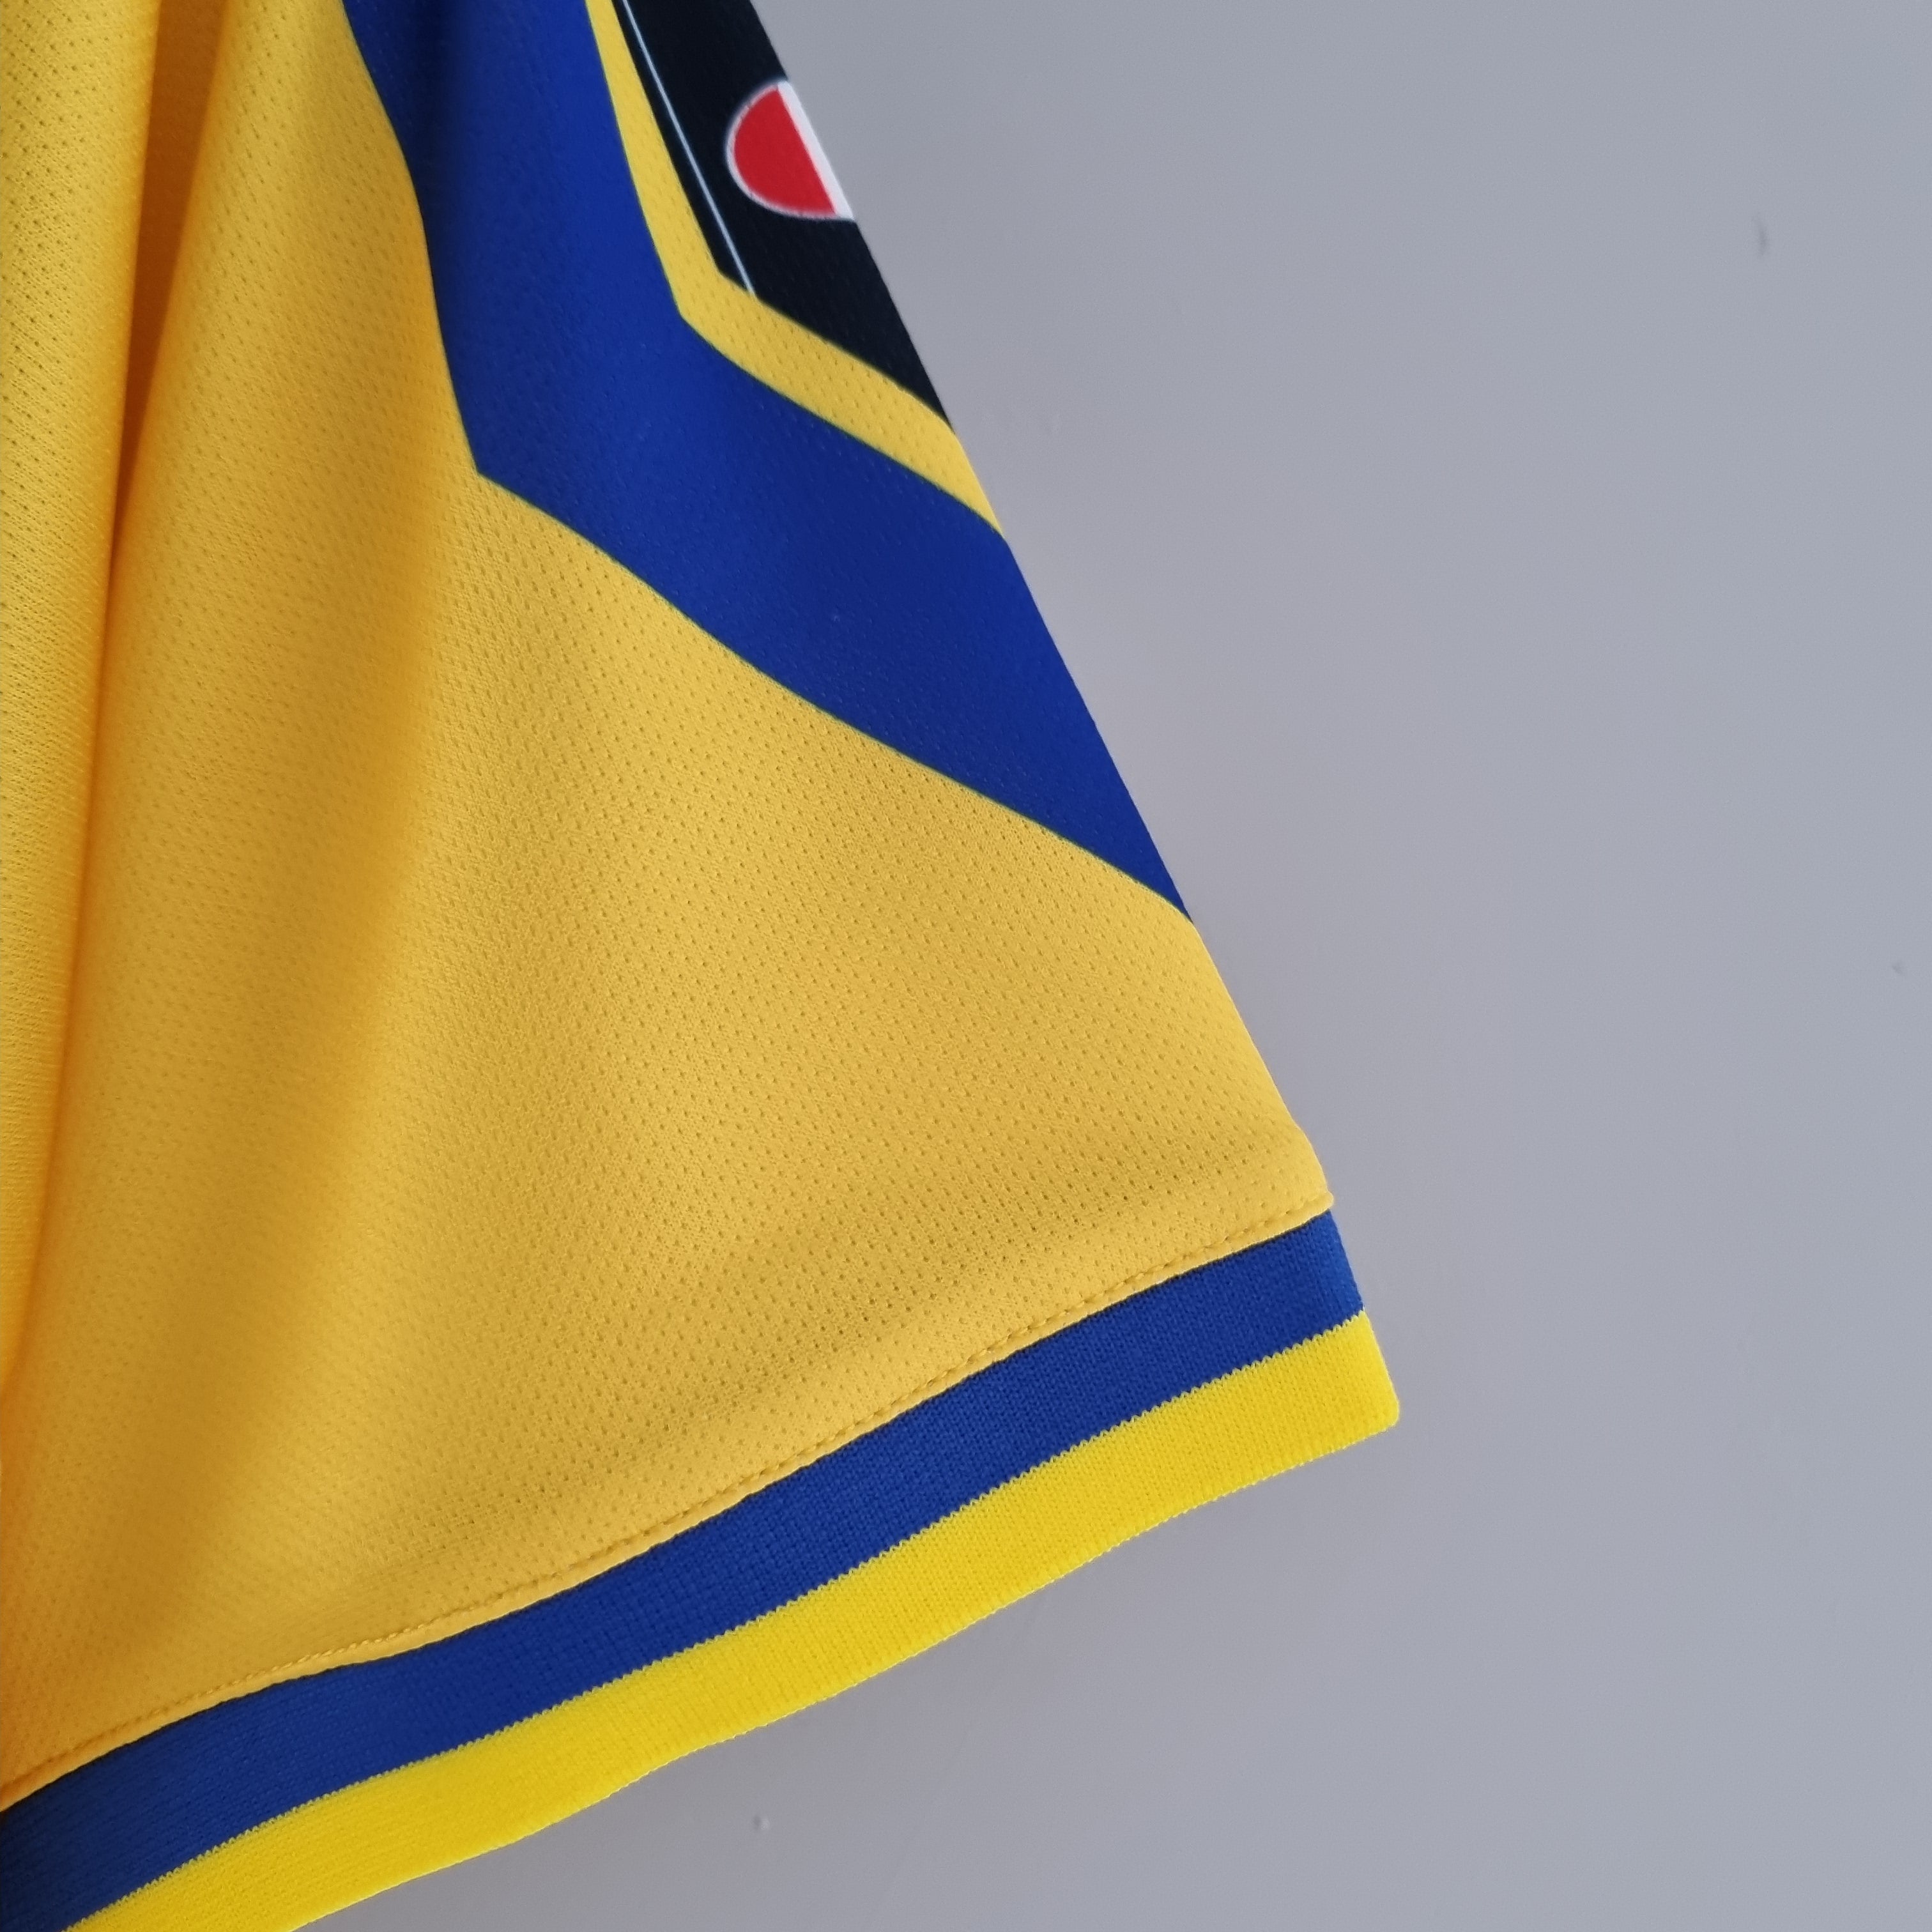 Parma 1999-00 Home Jersey